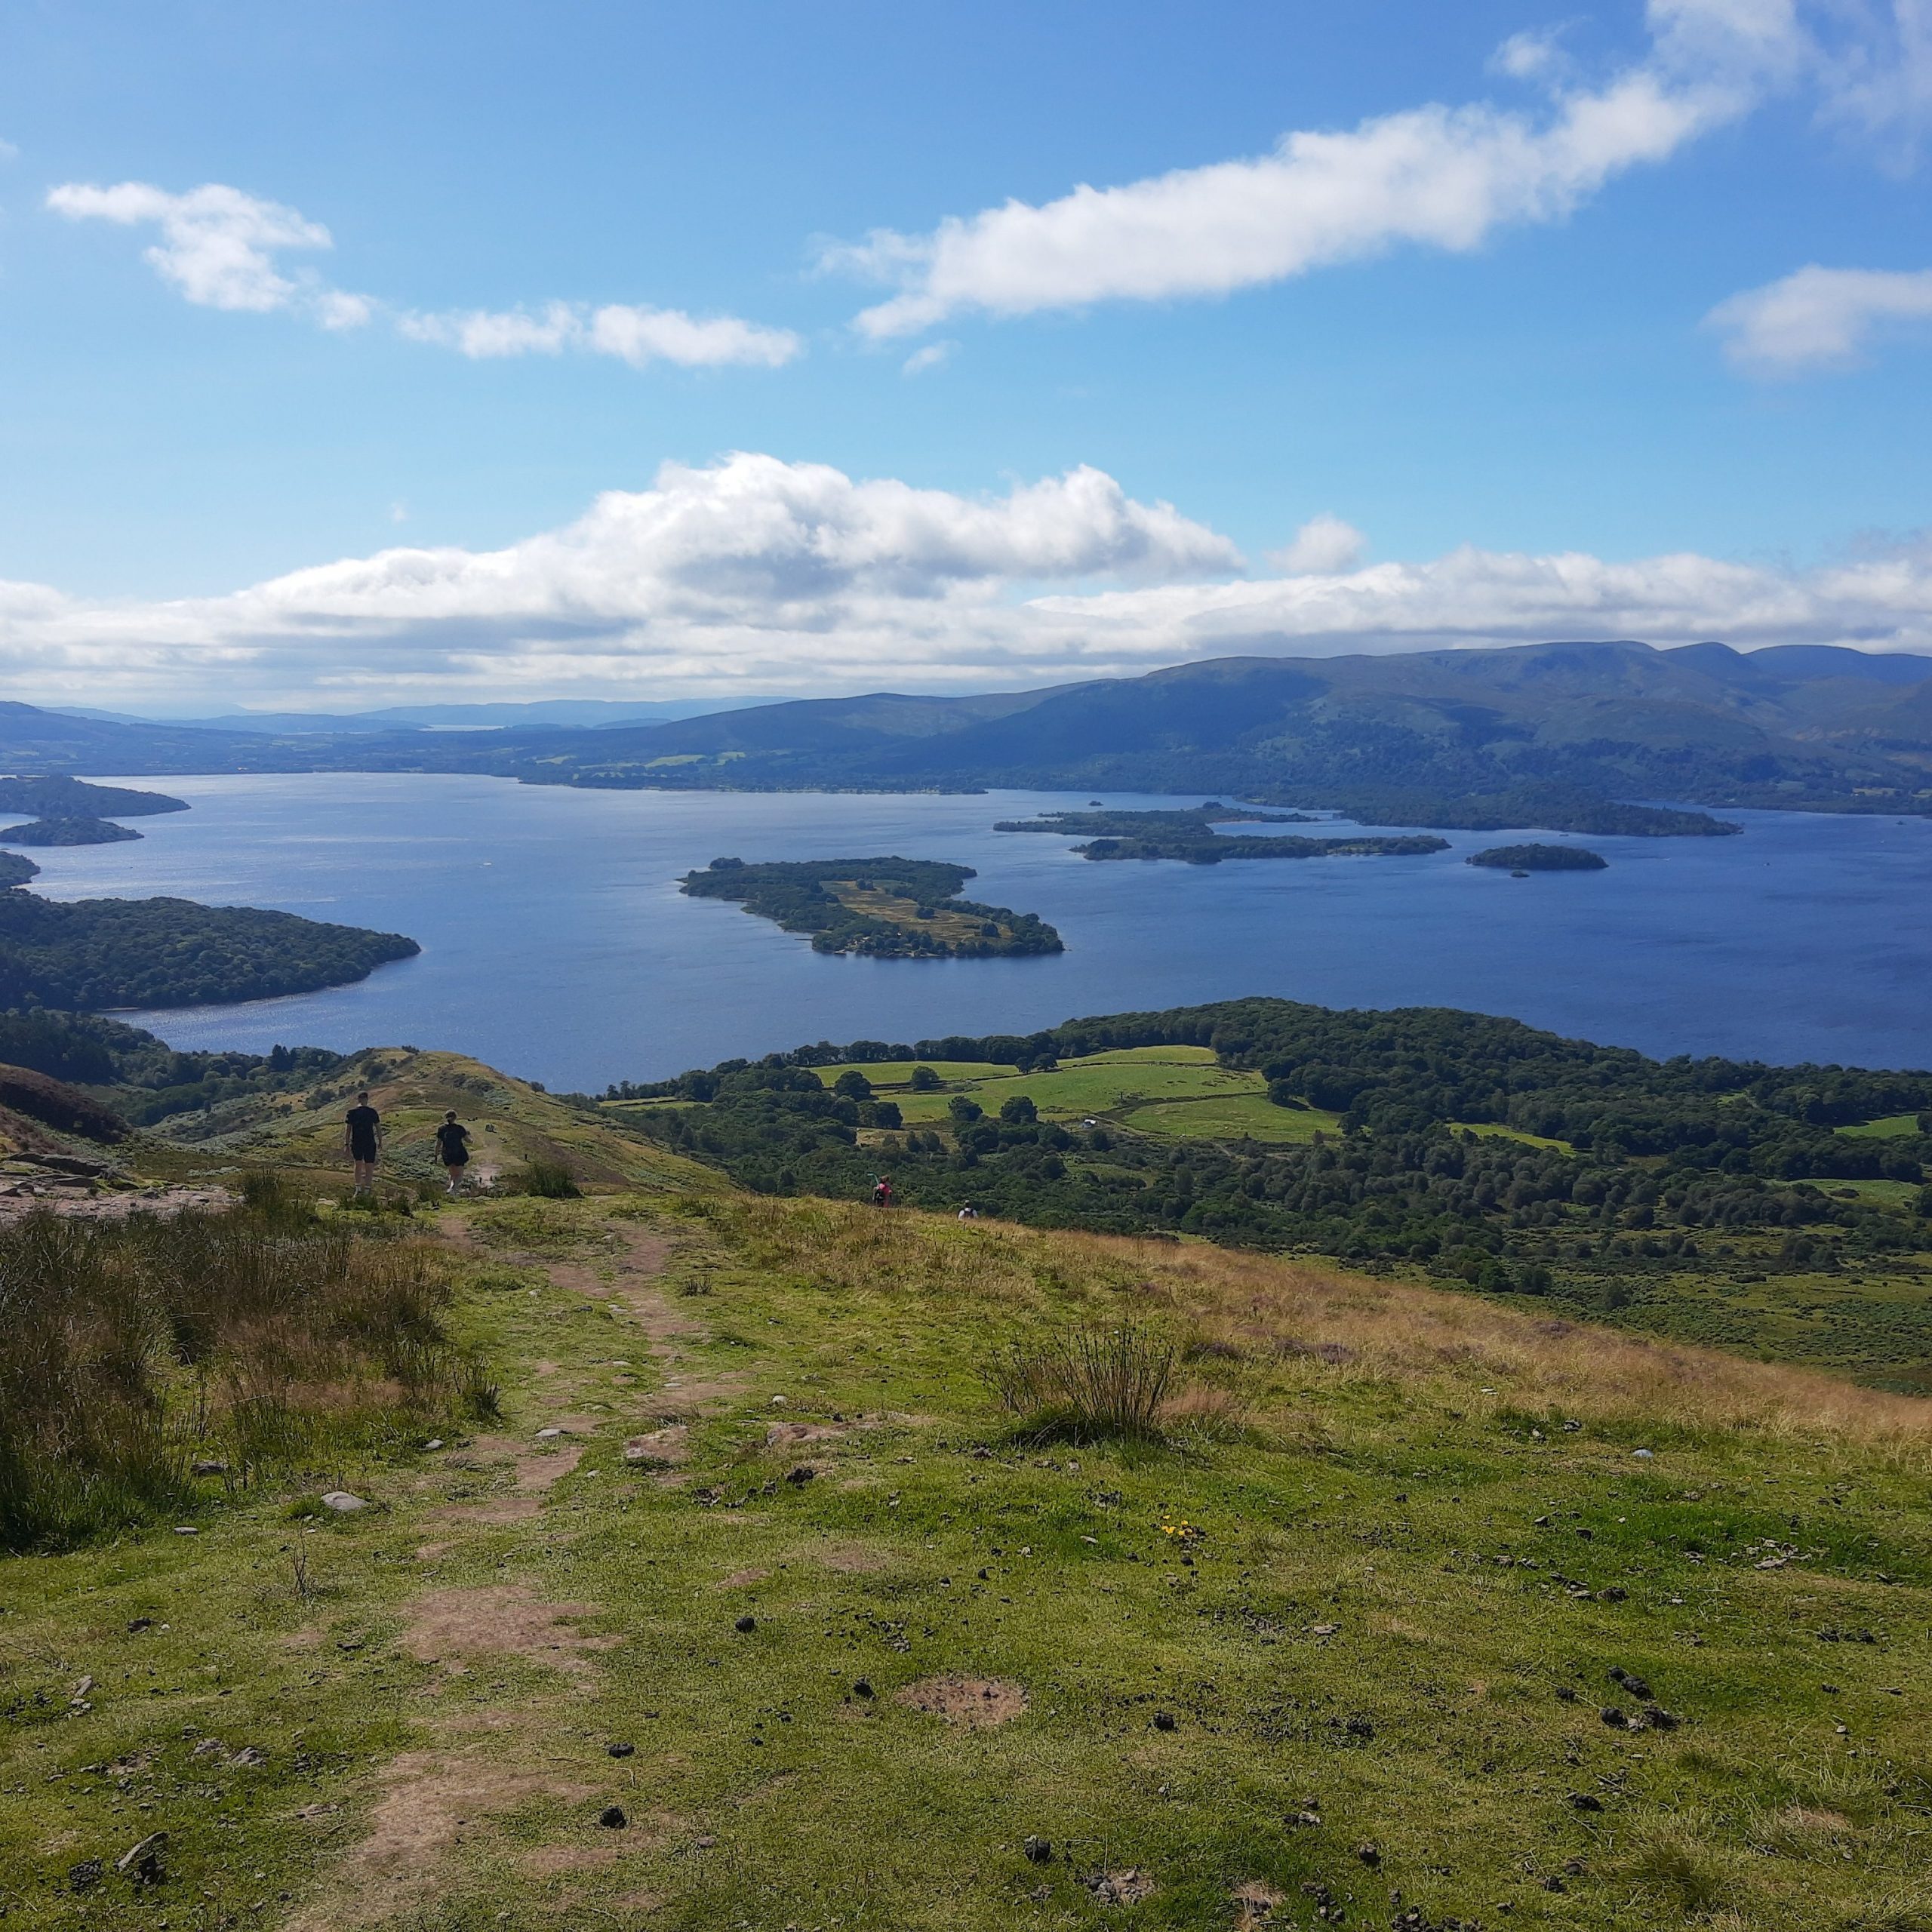 The Conic Hill